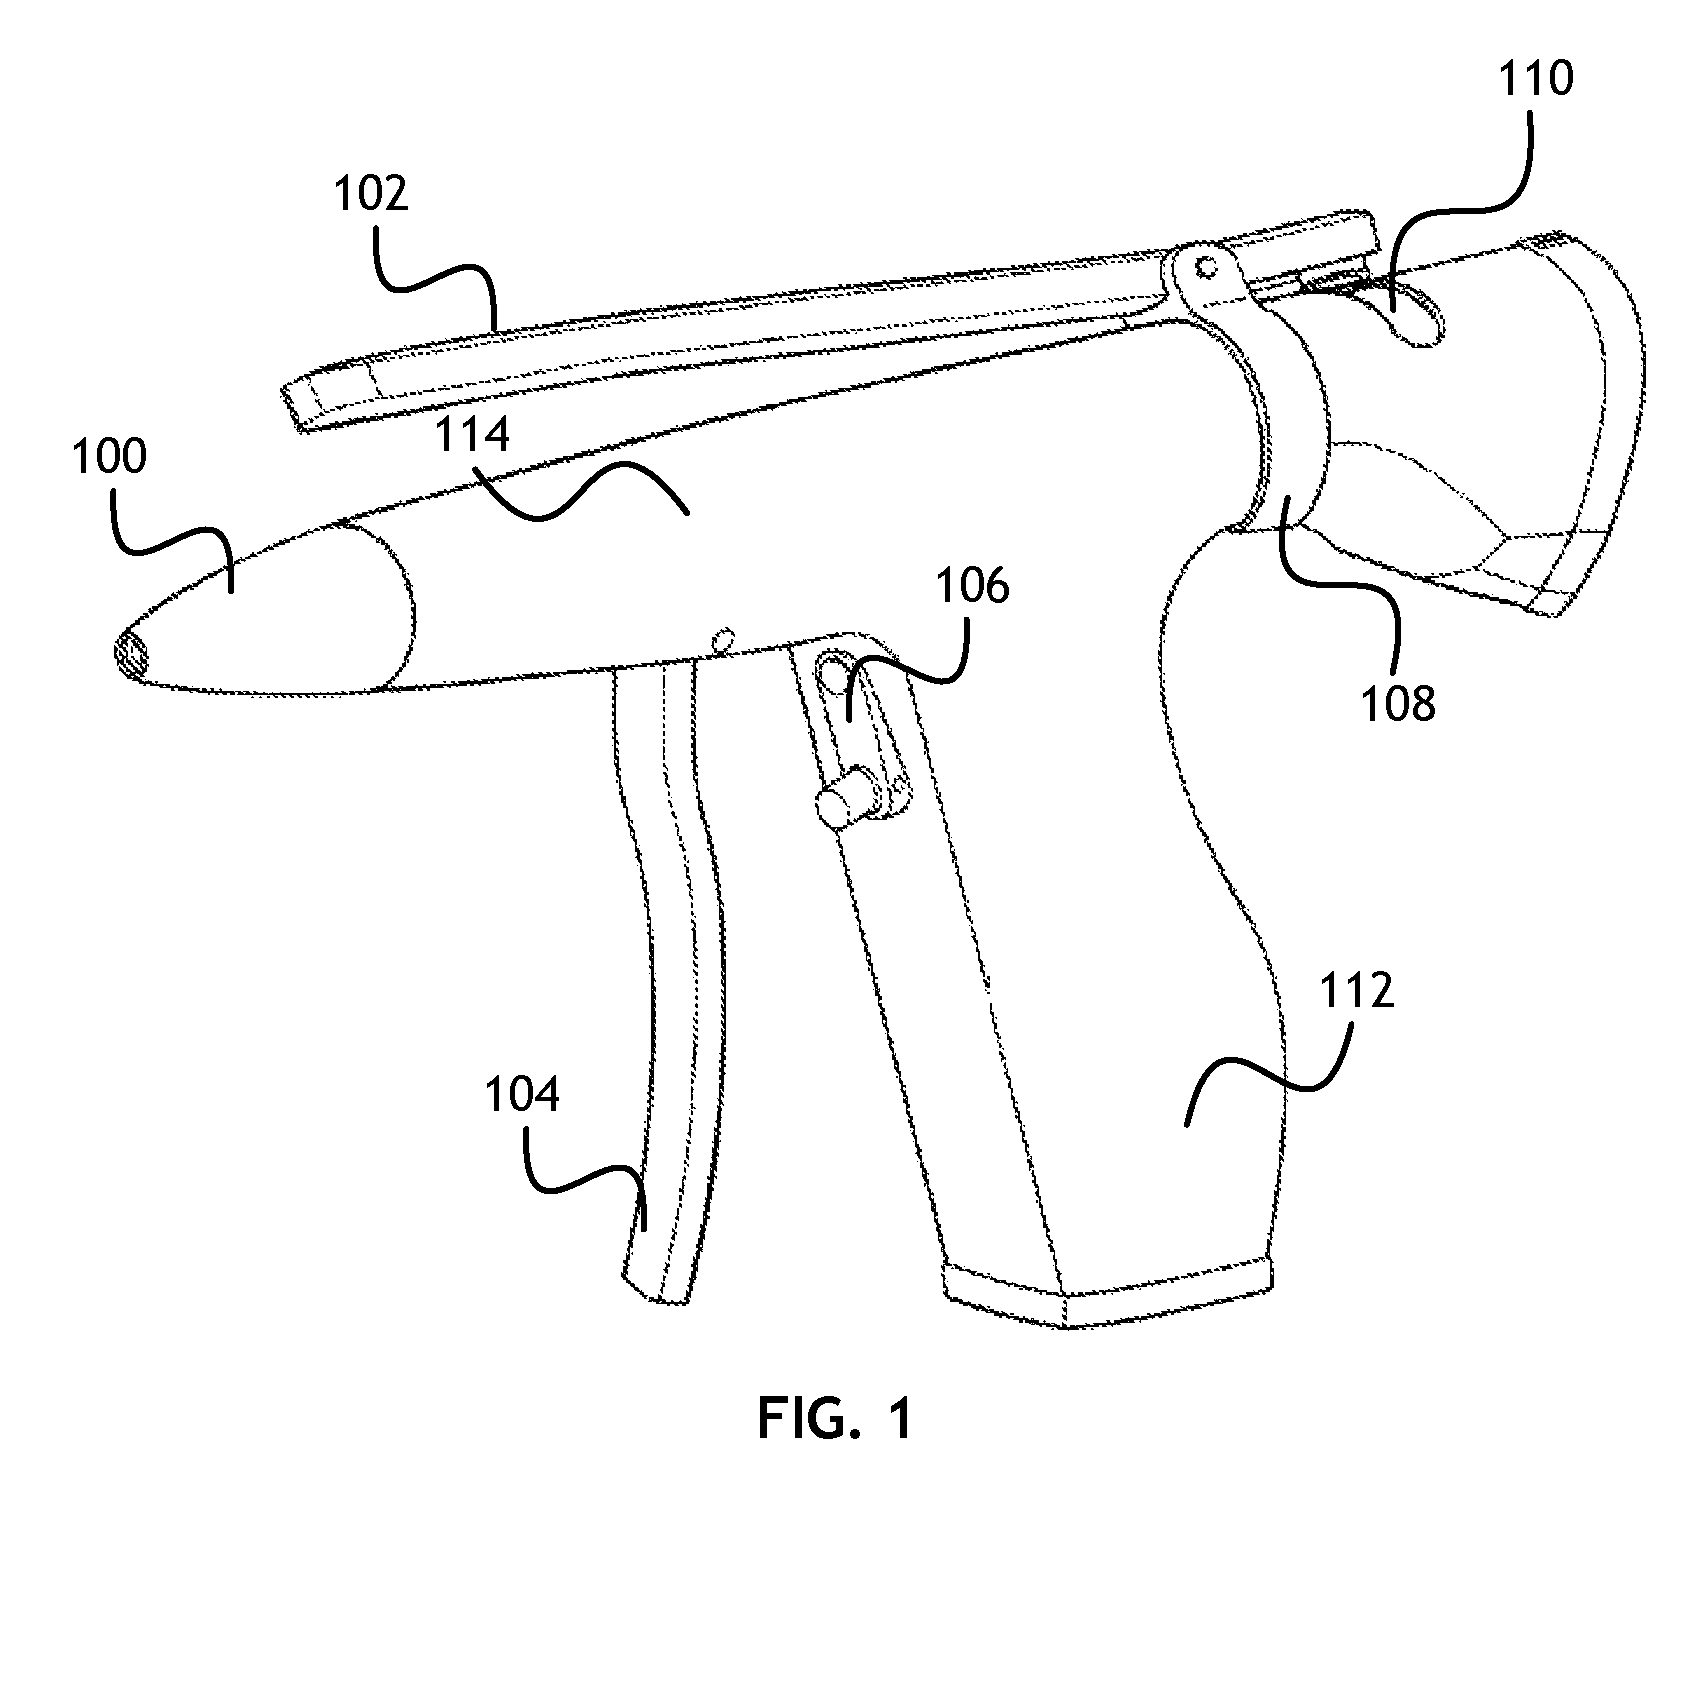 Method and device for ergonomically and ambidextrously operable surgical device